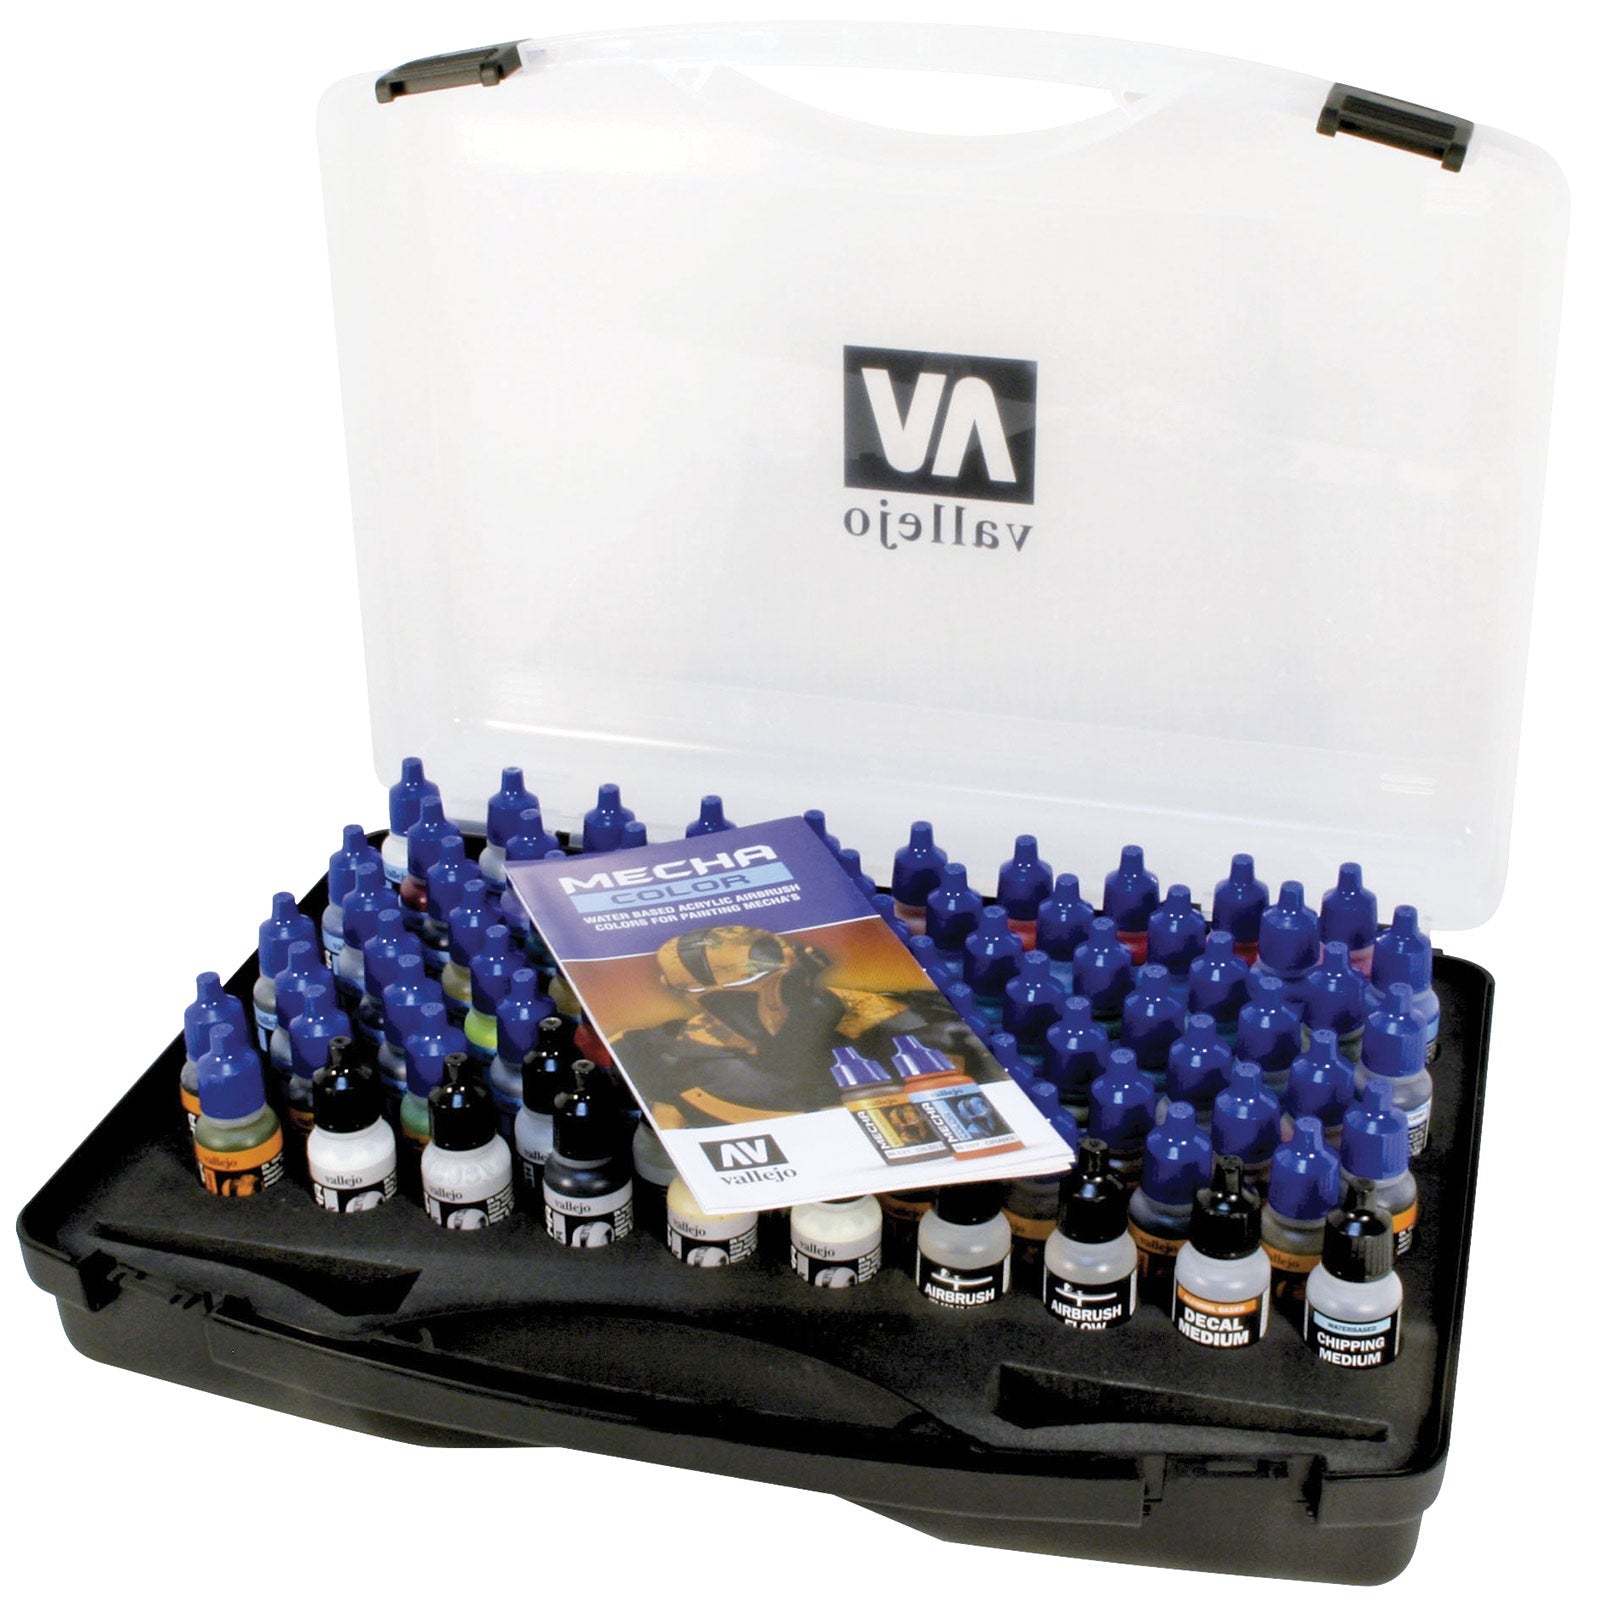 Acrylicos Vallejo Mecha Colors Model Air Paint Set, With Case, 80 Colors - Micro - Mark Acrylic Airbrush Paint